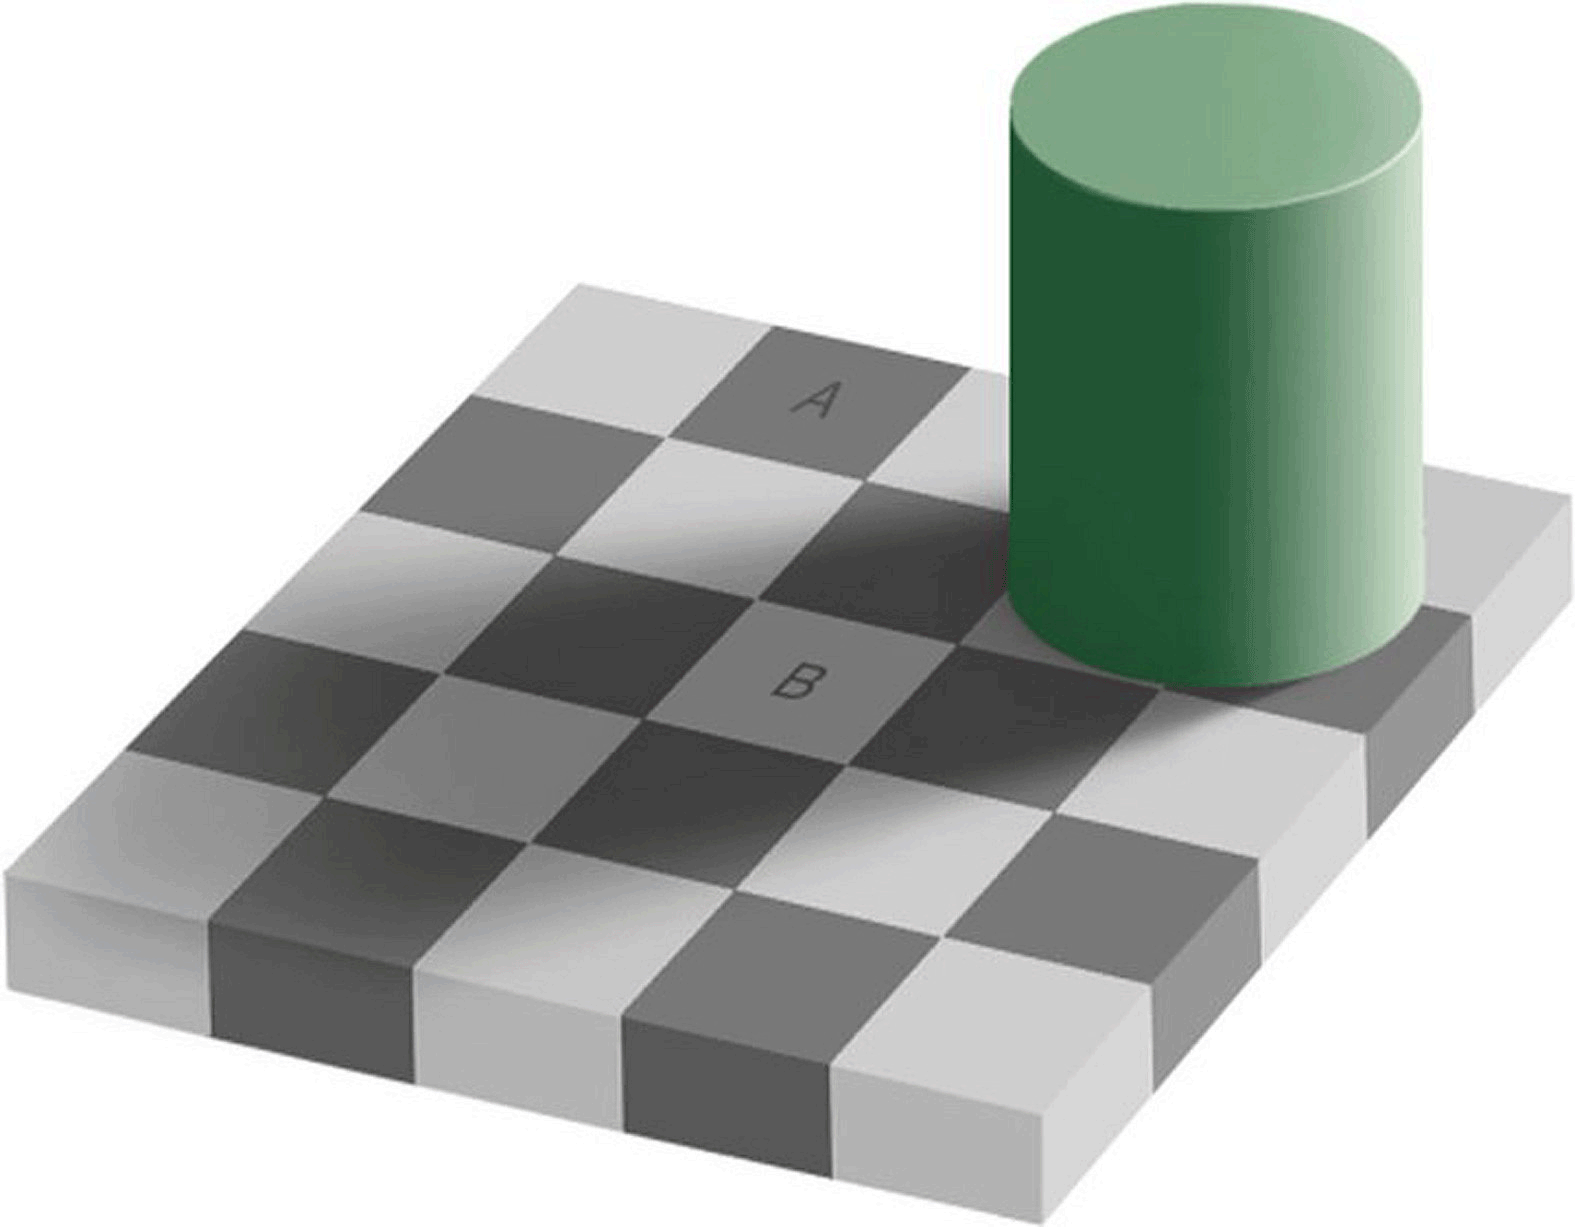 Optical Illusions Gif - ClipArt Best